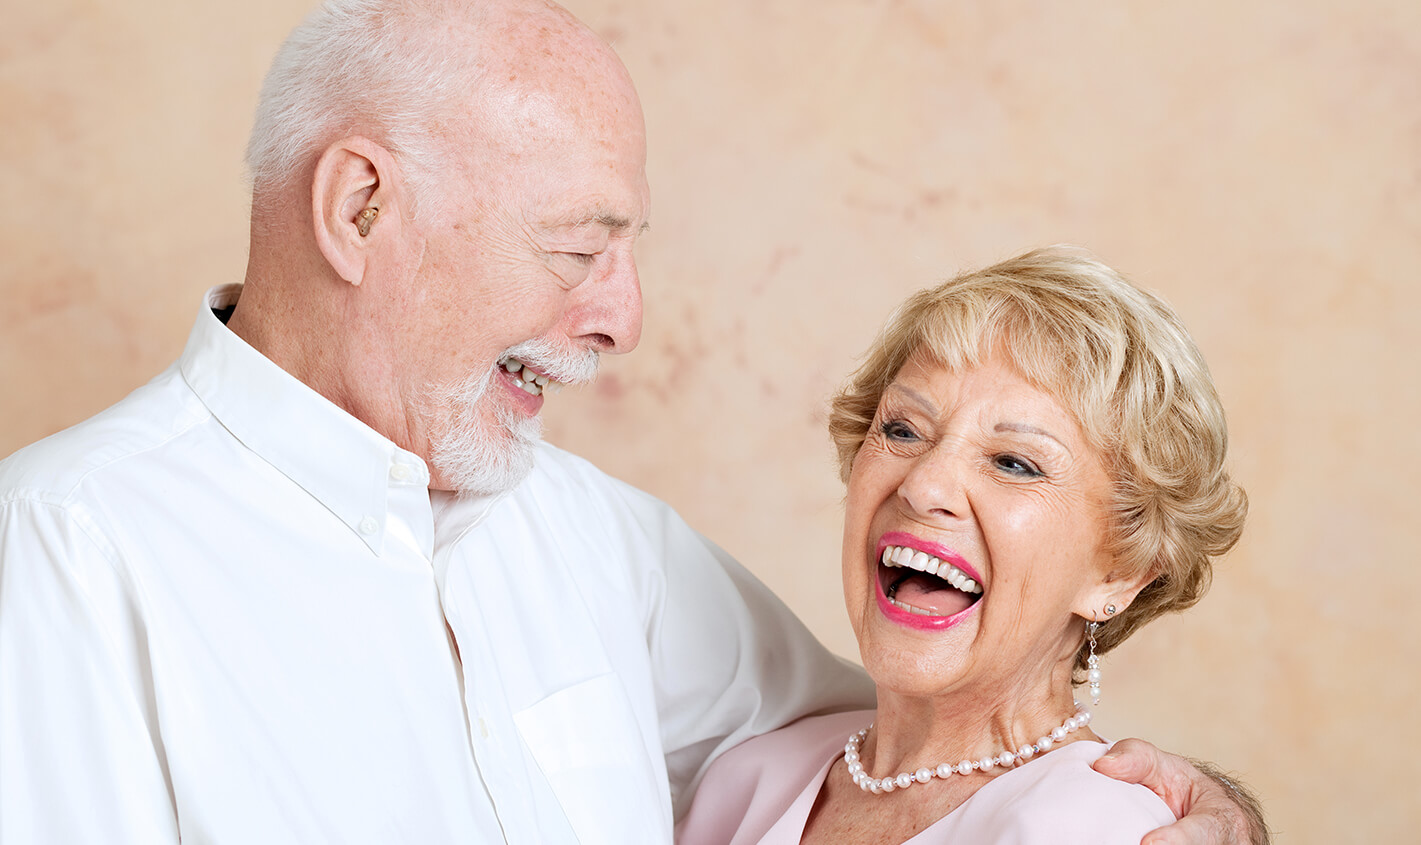 If you are looking to complete your smile, take advantage of the many benefits offered by partial dentures